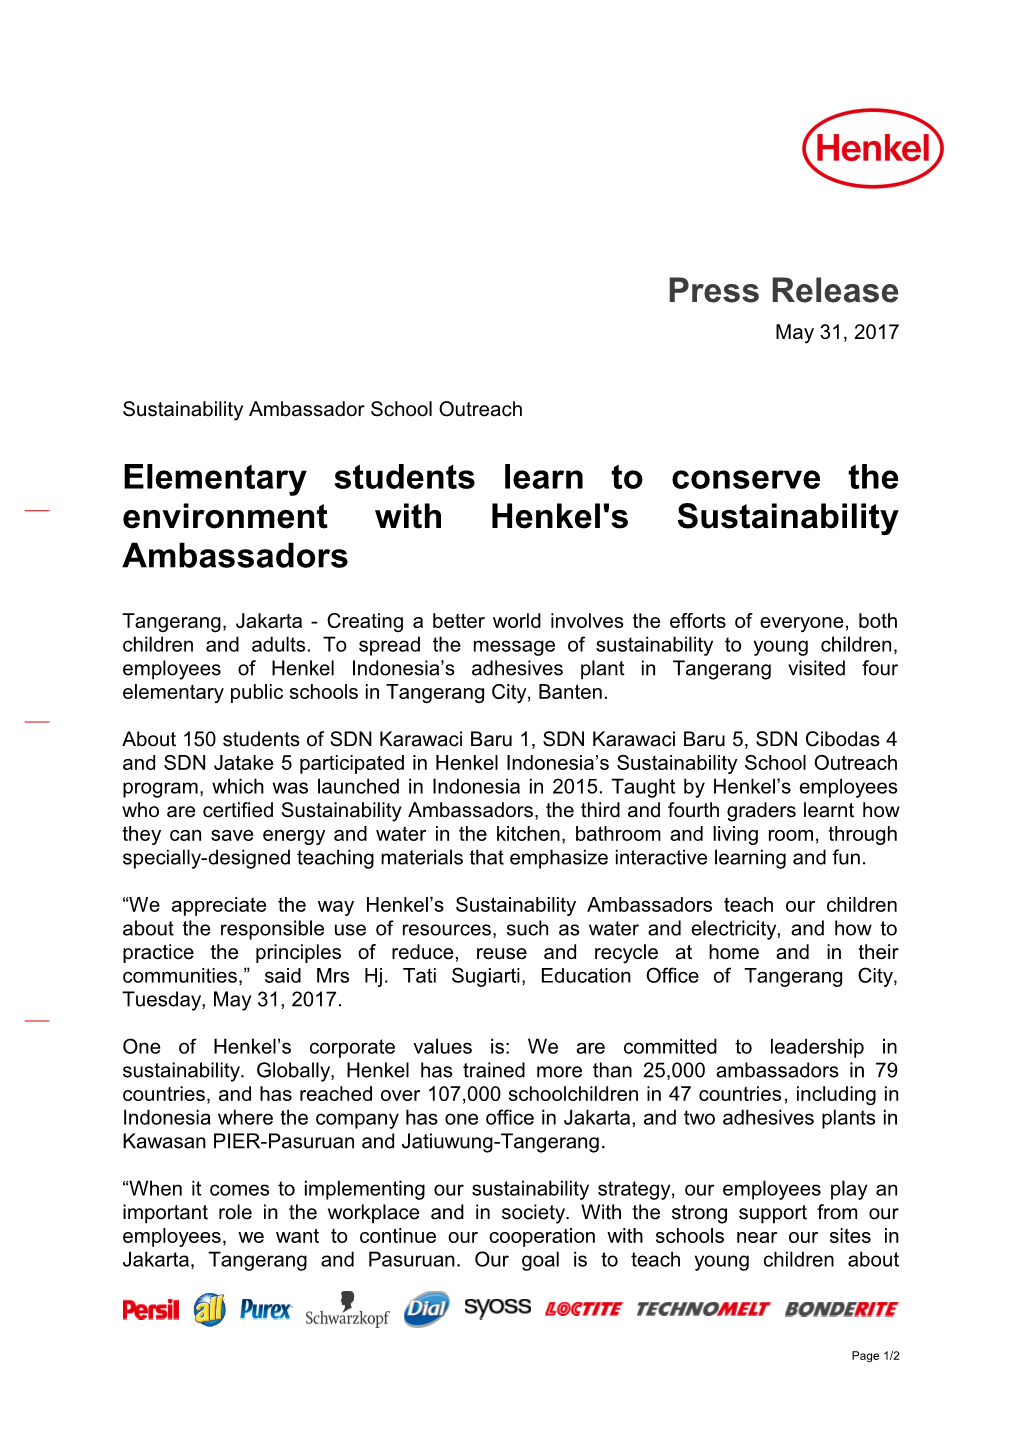 Elementary Students Learn to Conserve the Environment with Henkel's Sustainability Ambassadors